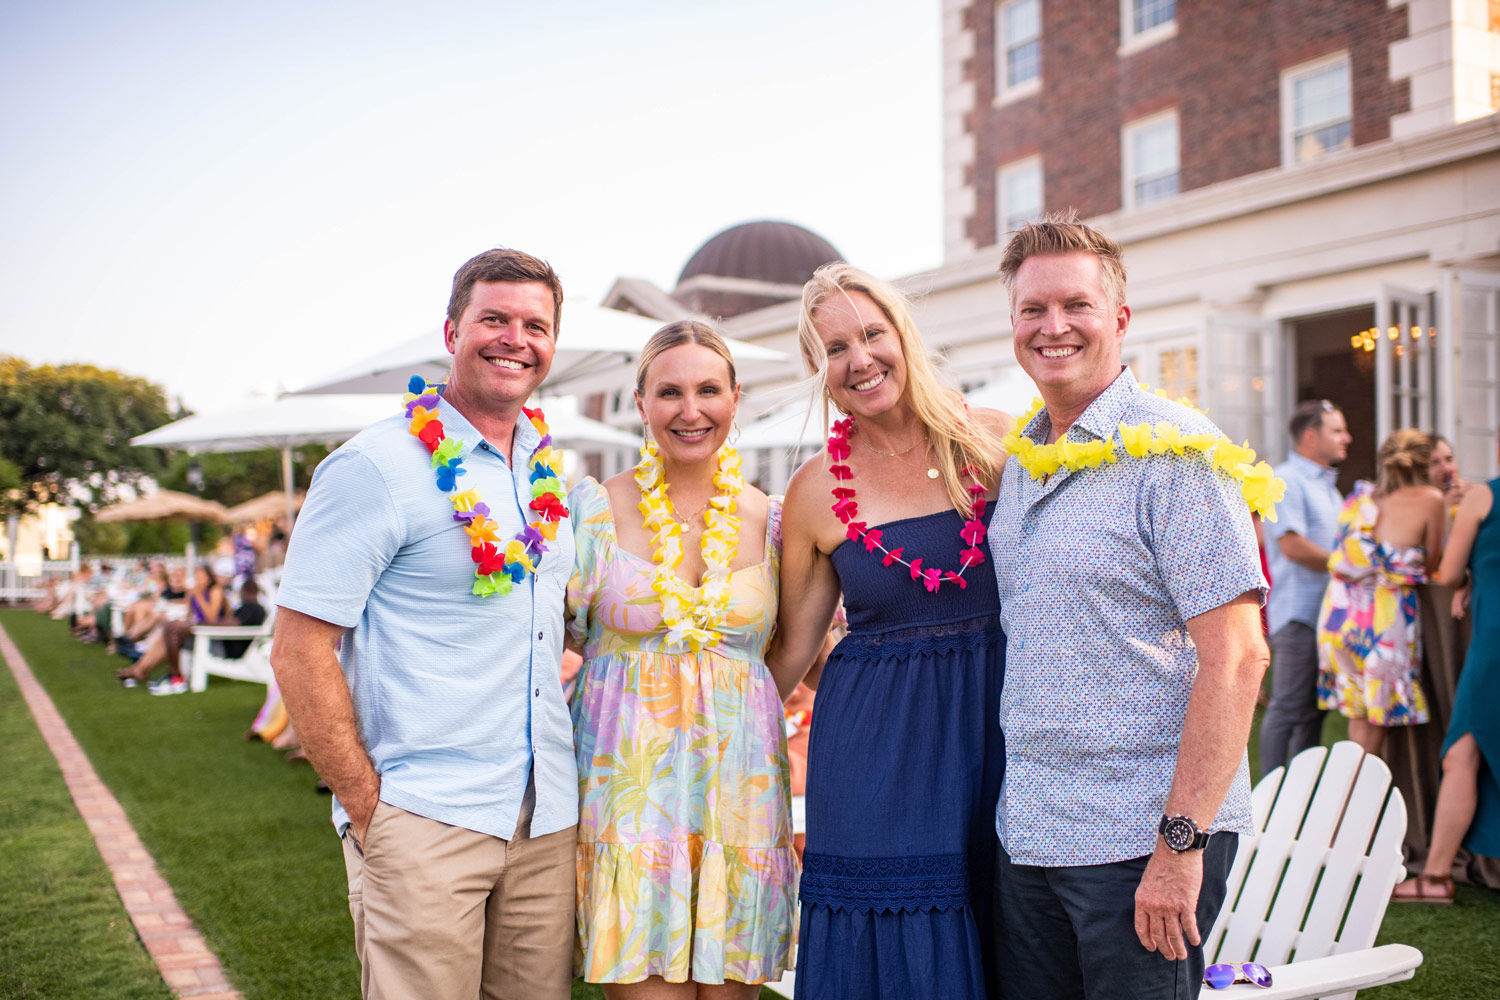 A Margaritaville themed Garden Party at Becca, located at The Historic Cavalier Hotel